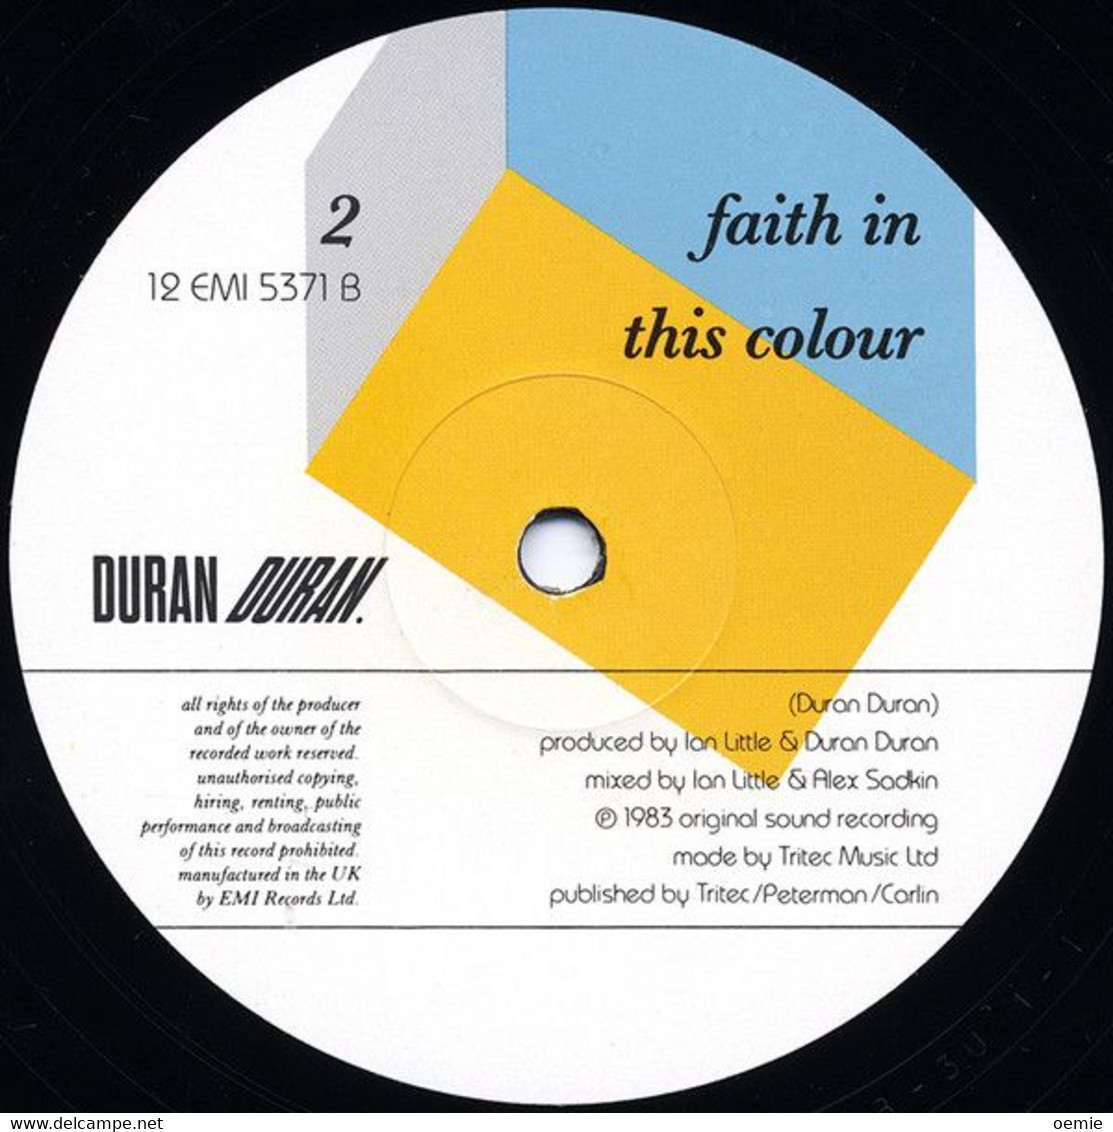 DURAN DURAN °  IS THERE SOMETHING  I SHOULD KNOW  MONSTER MIX - 45 Rpm - Maxi-Single